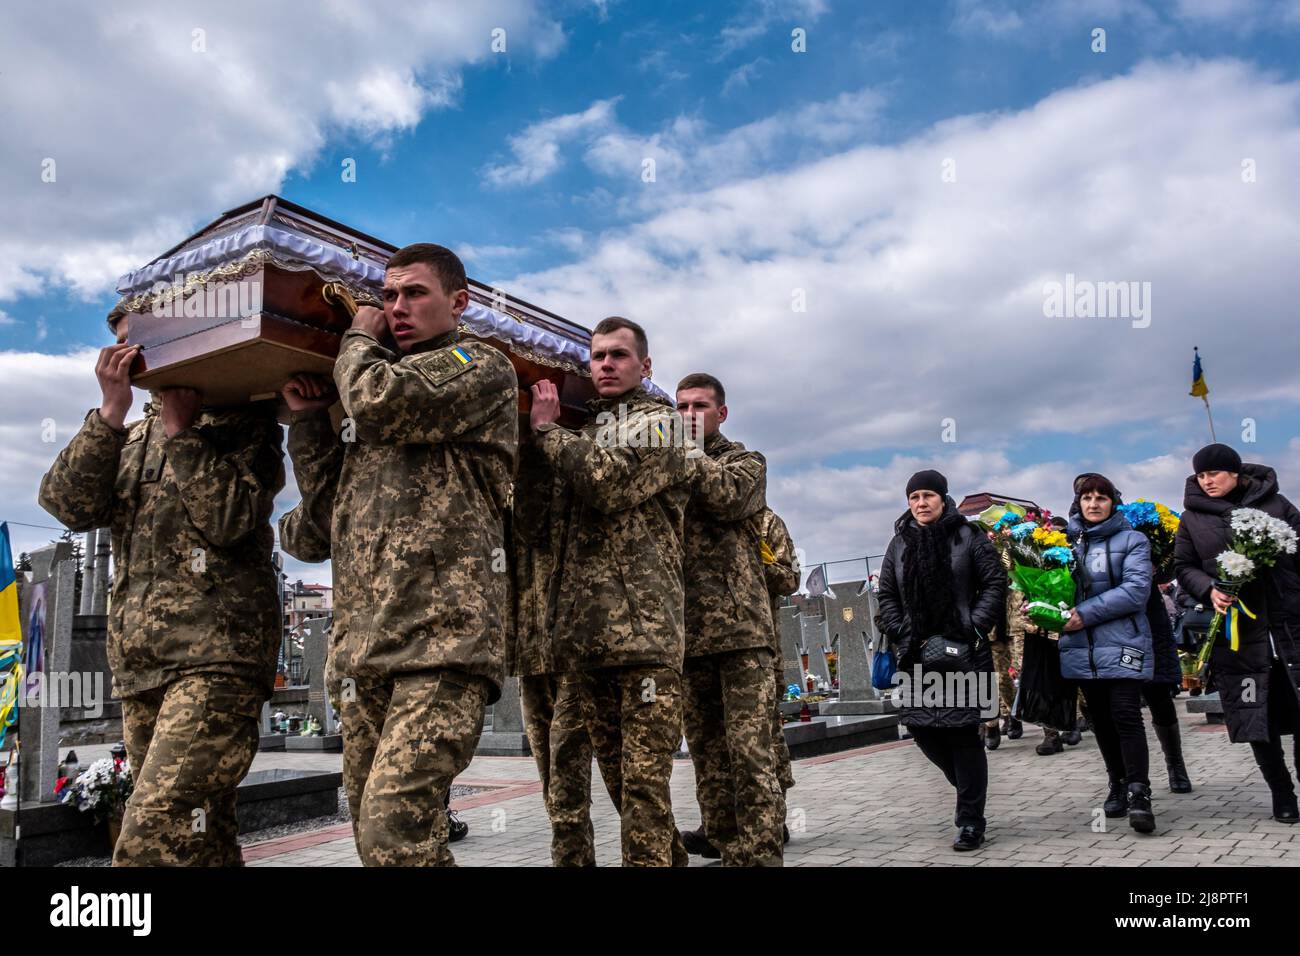 Soldiers carry a coffin of a dead soldier at Lviv cemetery. Lviv military funeral. Russia invaded Ukraine on 24 February 2022, triggering the largest military attack in Europe since World War II. Stock Photo